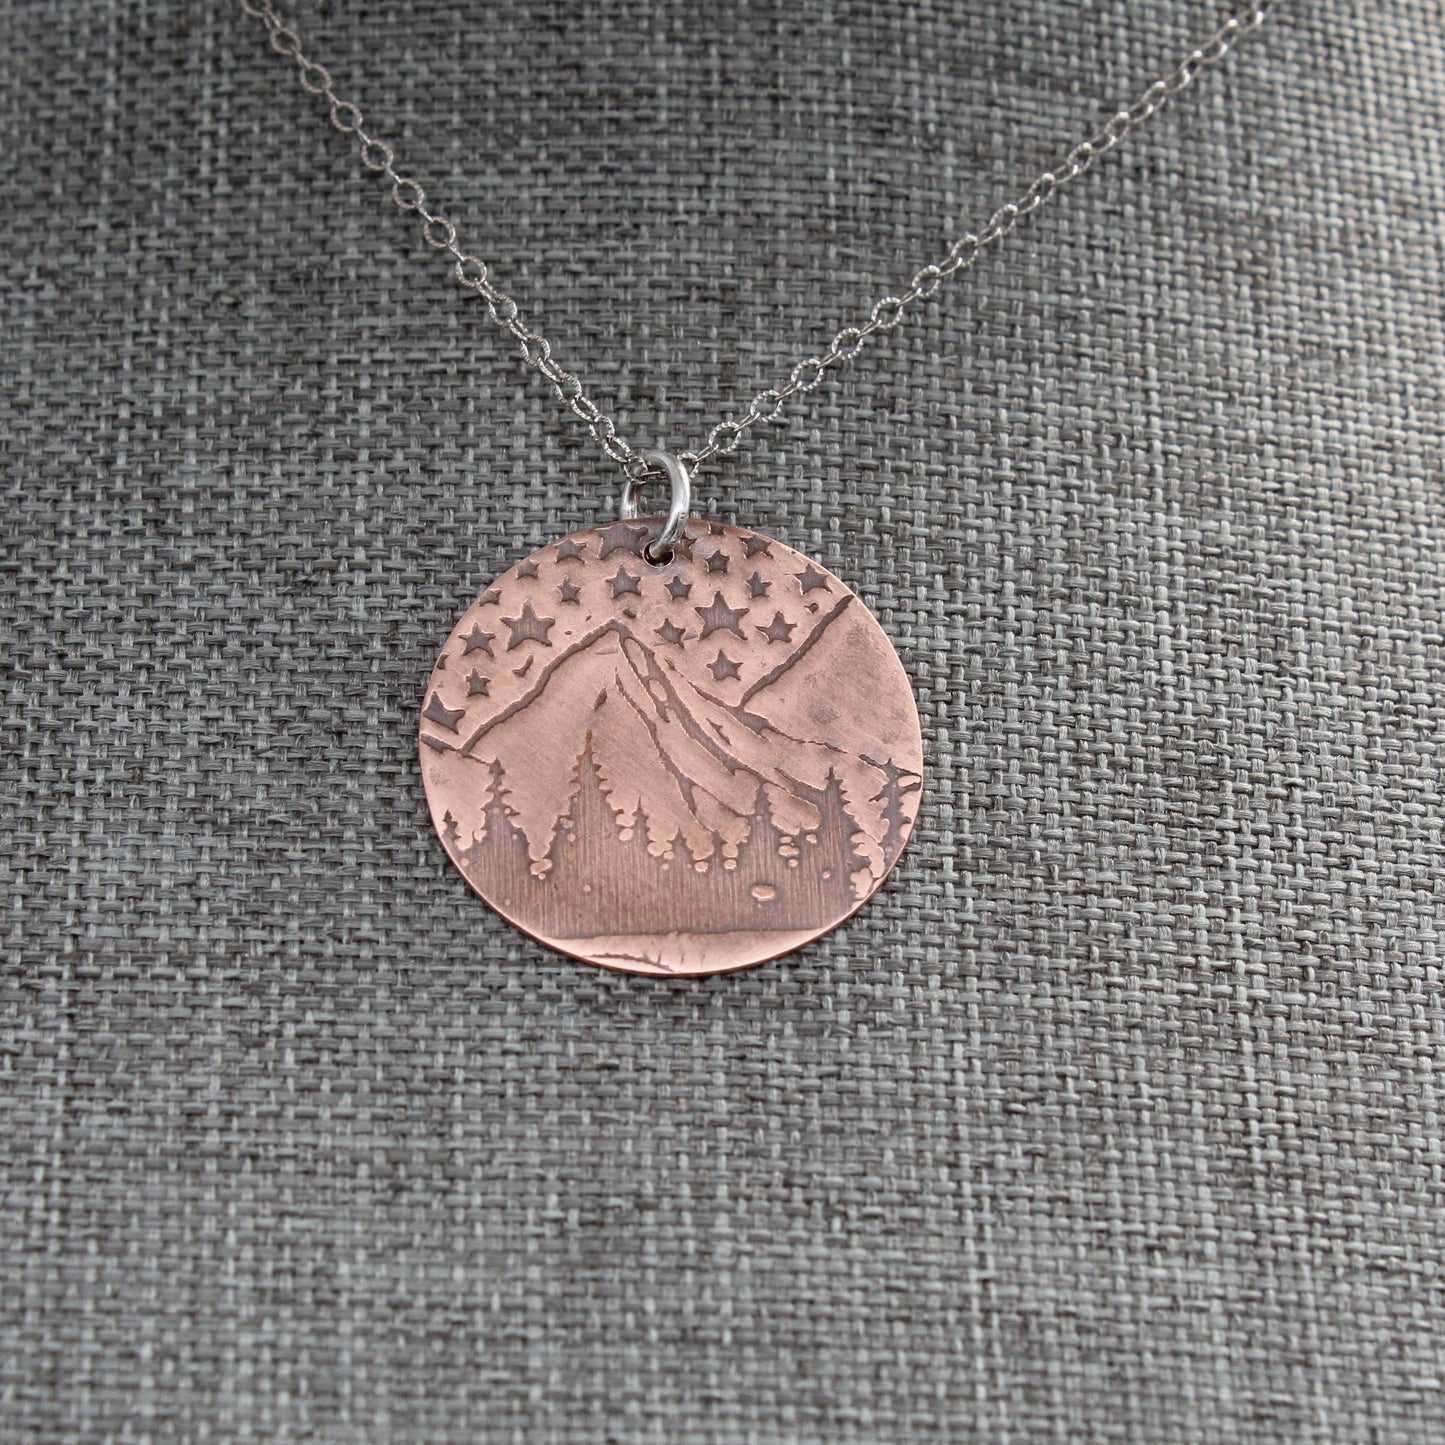 Sunflower or Mountain Necklace in Copper or Silver